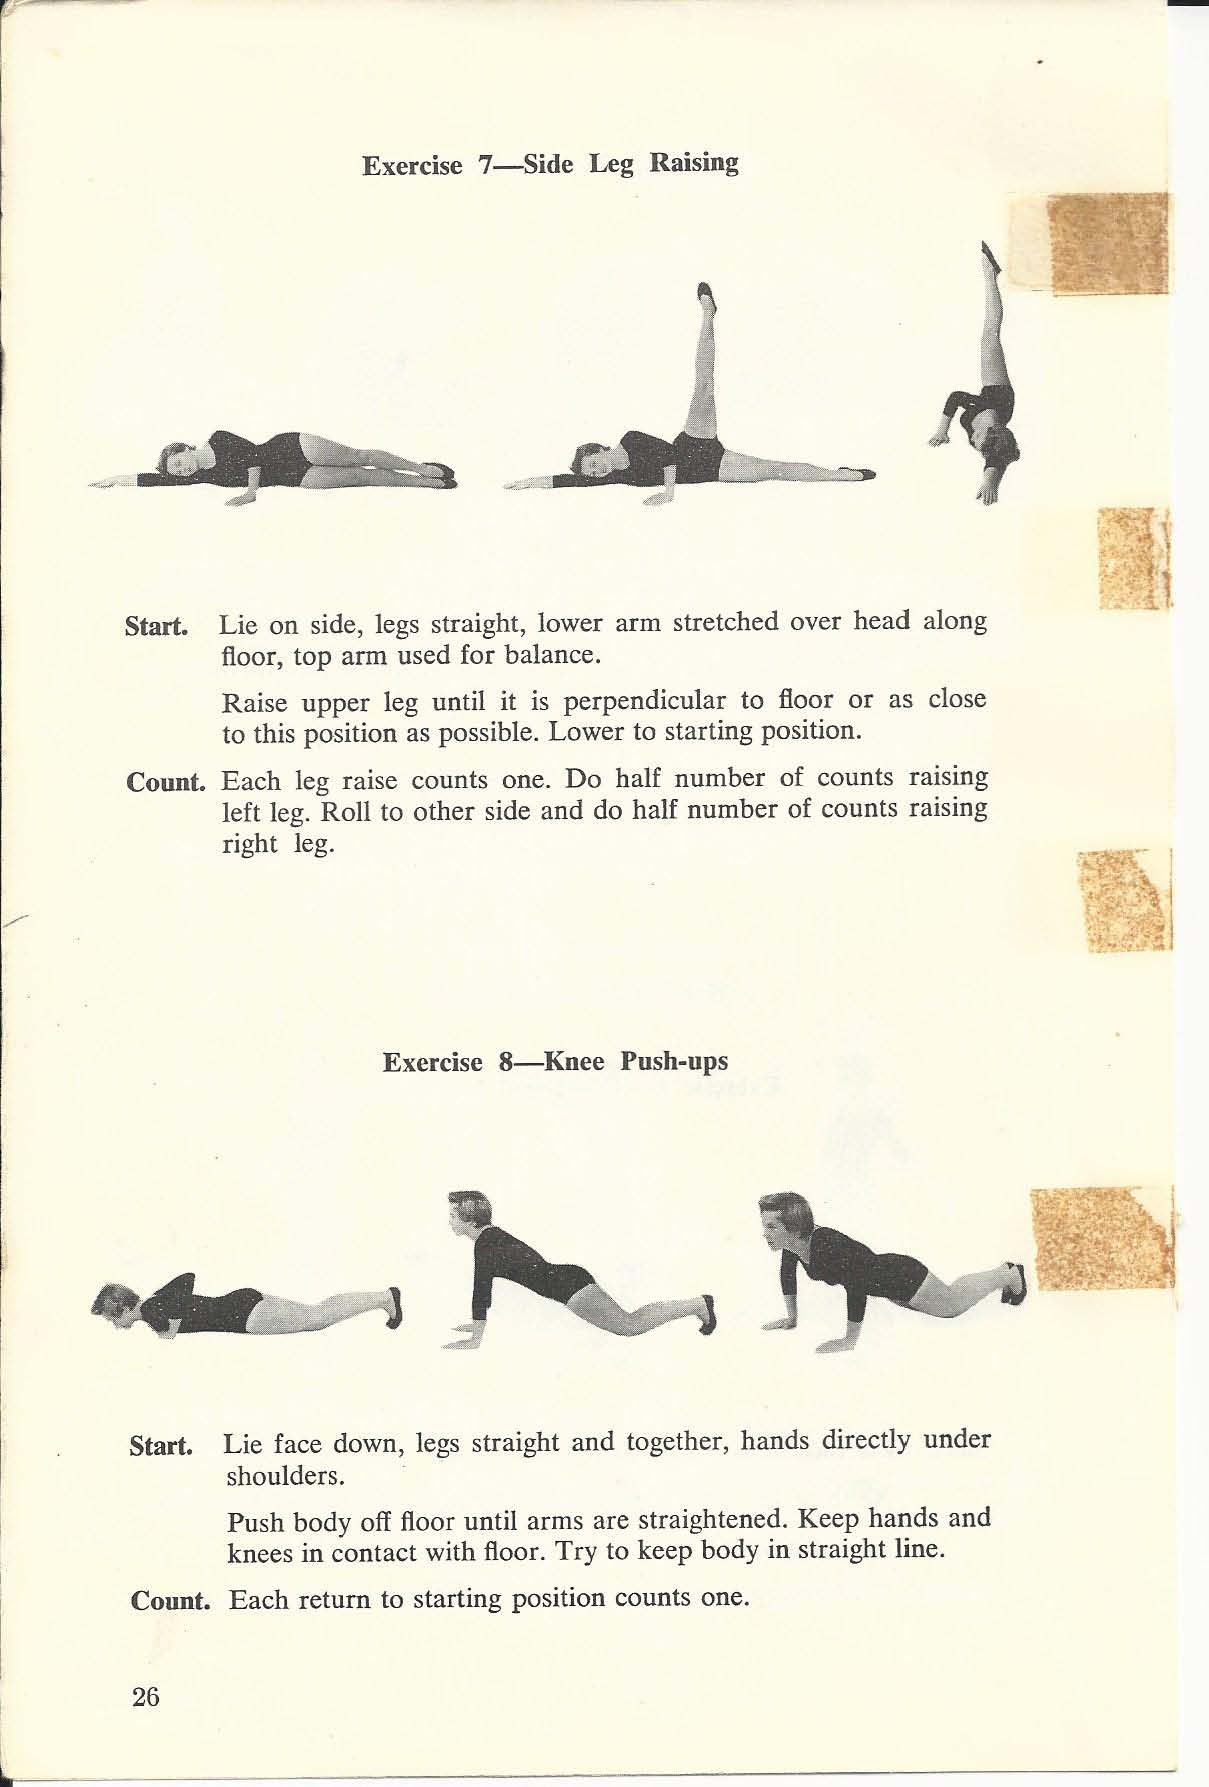 http://airforcemuseum.ca/eng/wp-content/uploads/2020/05/X-BX-Exercise-Plan_Page_28.jpg